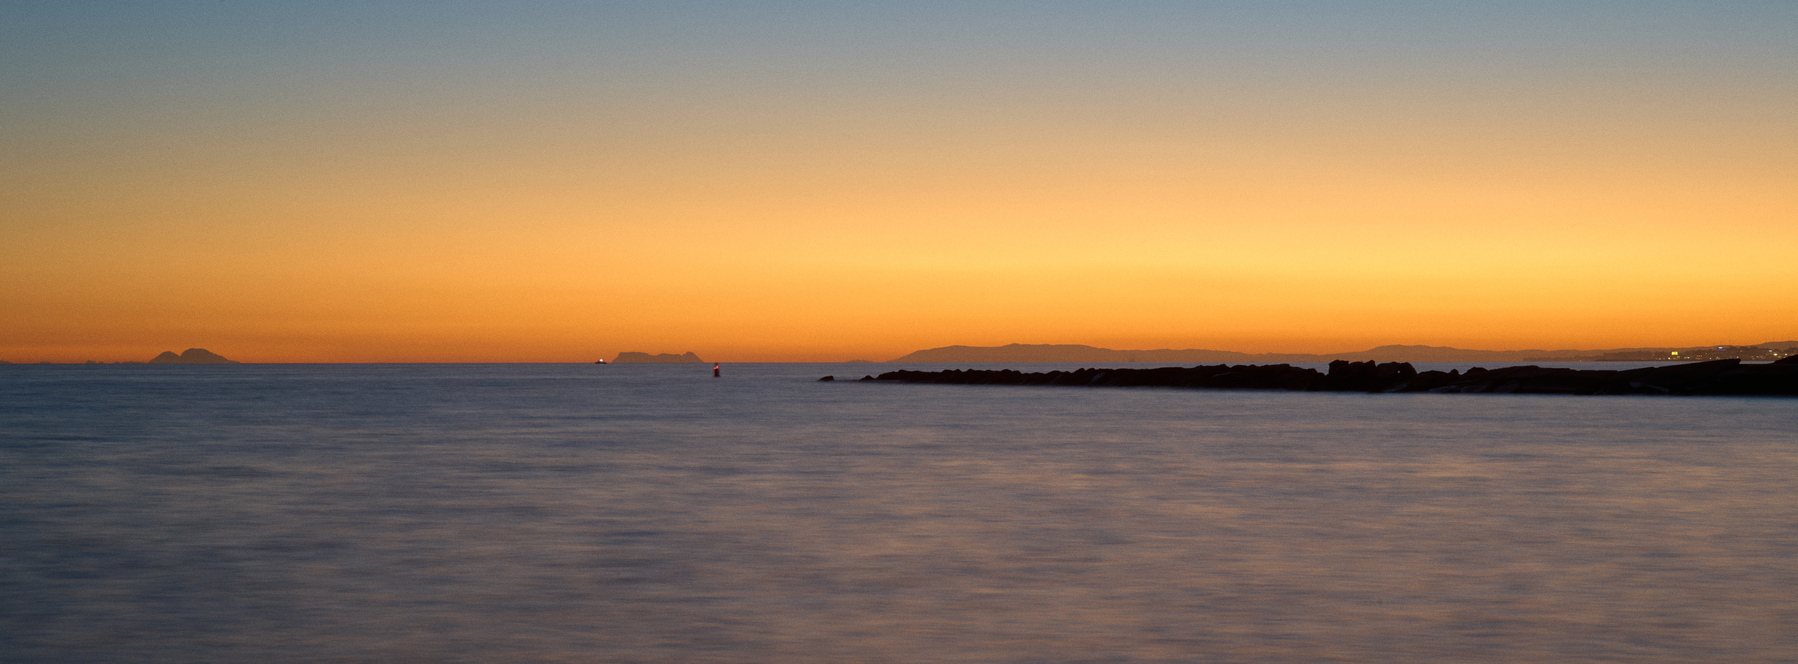 A sunset over Spain, Gibraltar, and Ceuta. The sea is rough but painterly, with swashes of blues and whites. The sky is a gradient of deep orange on the horizon going through yellow to blue hour hues.